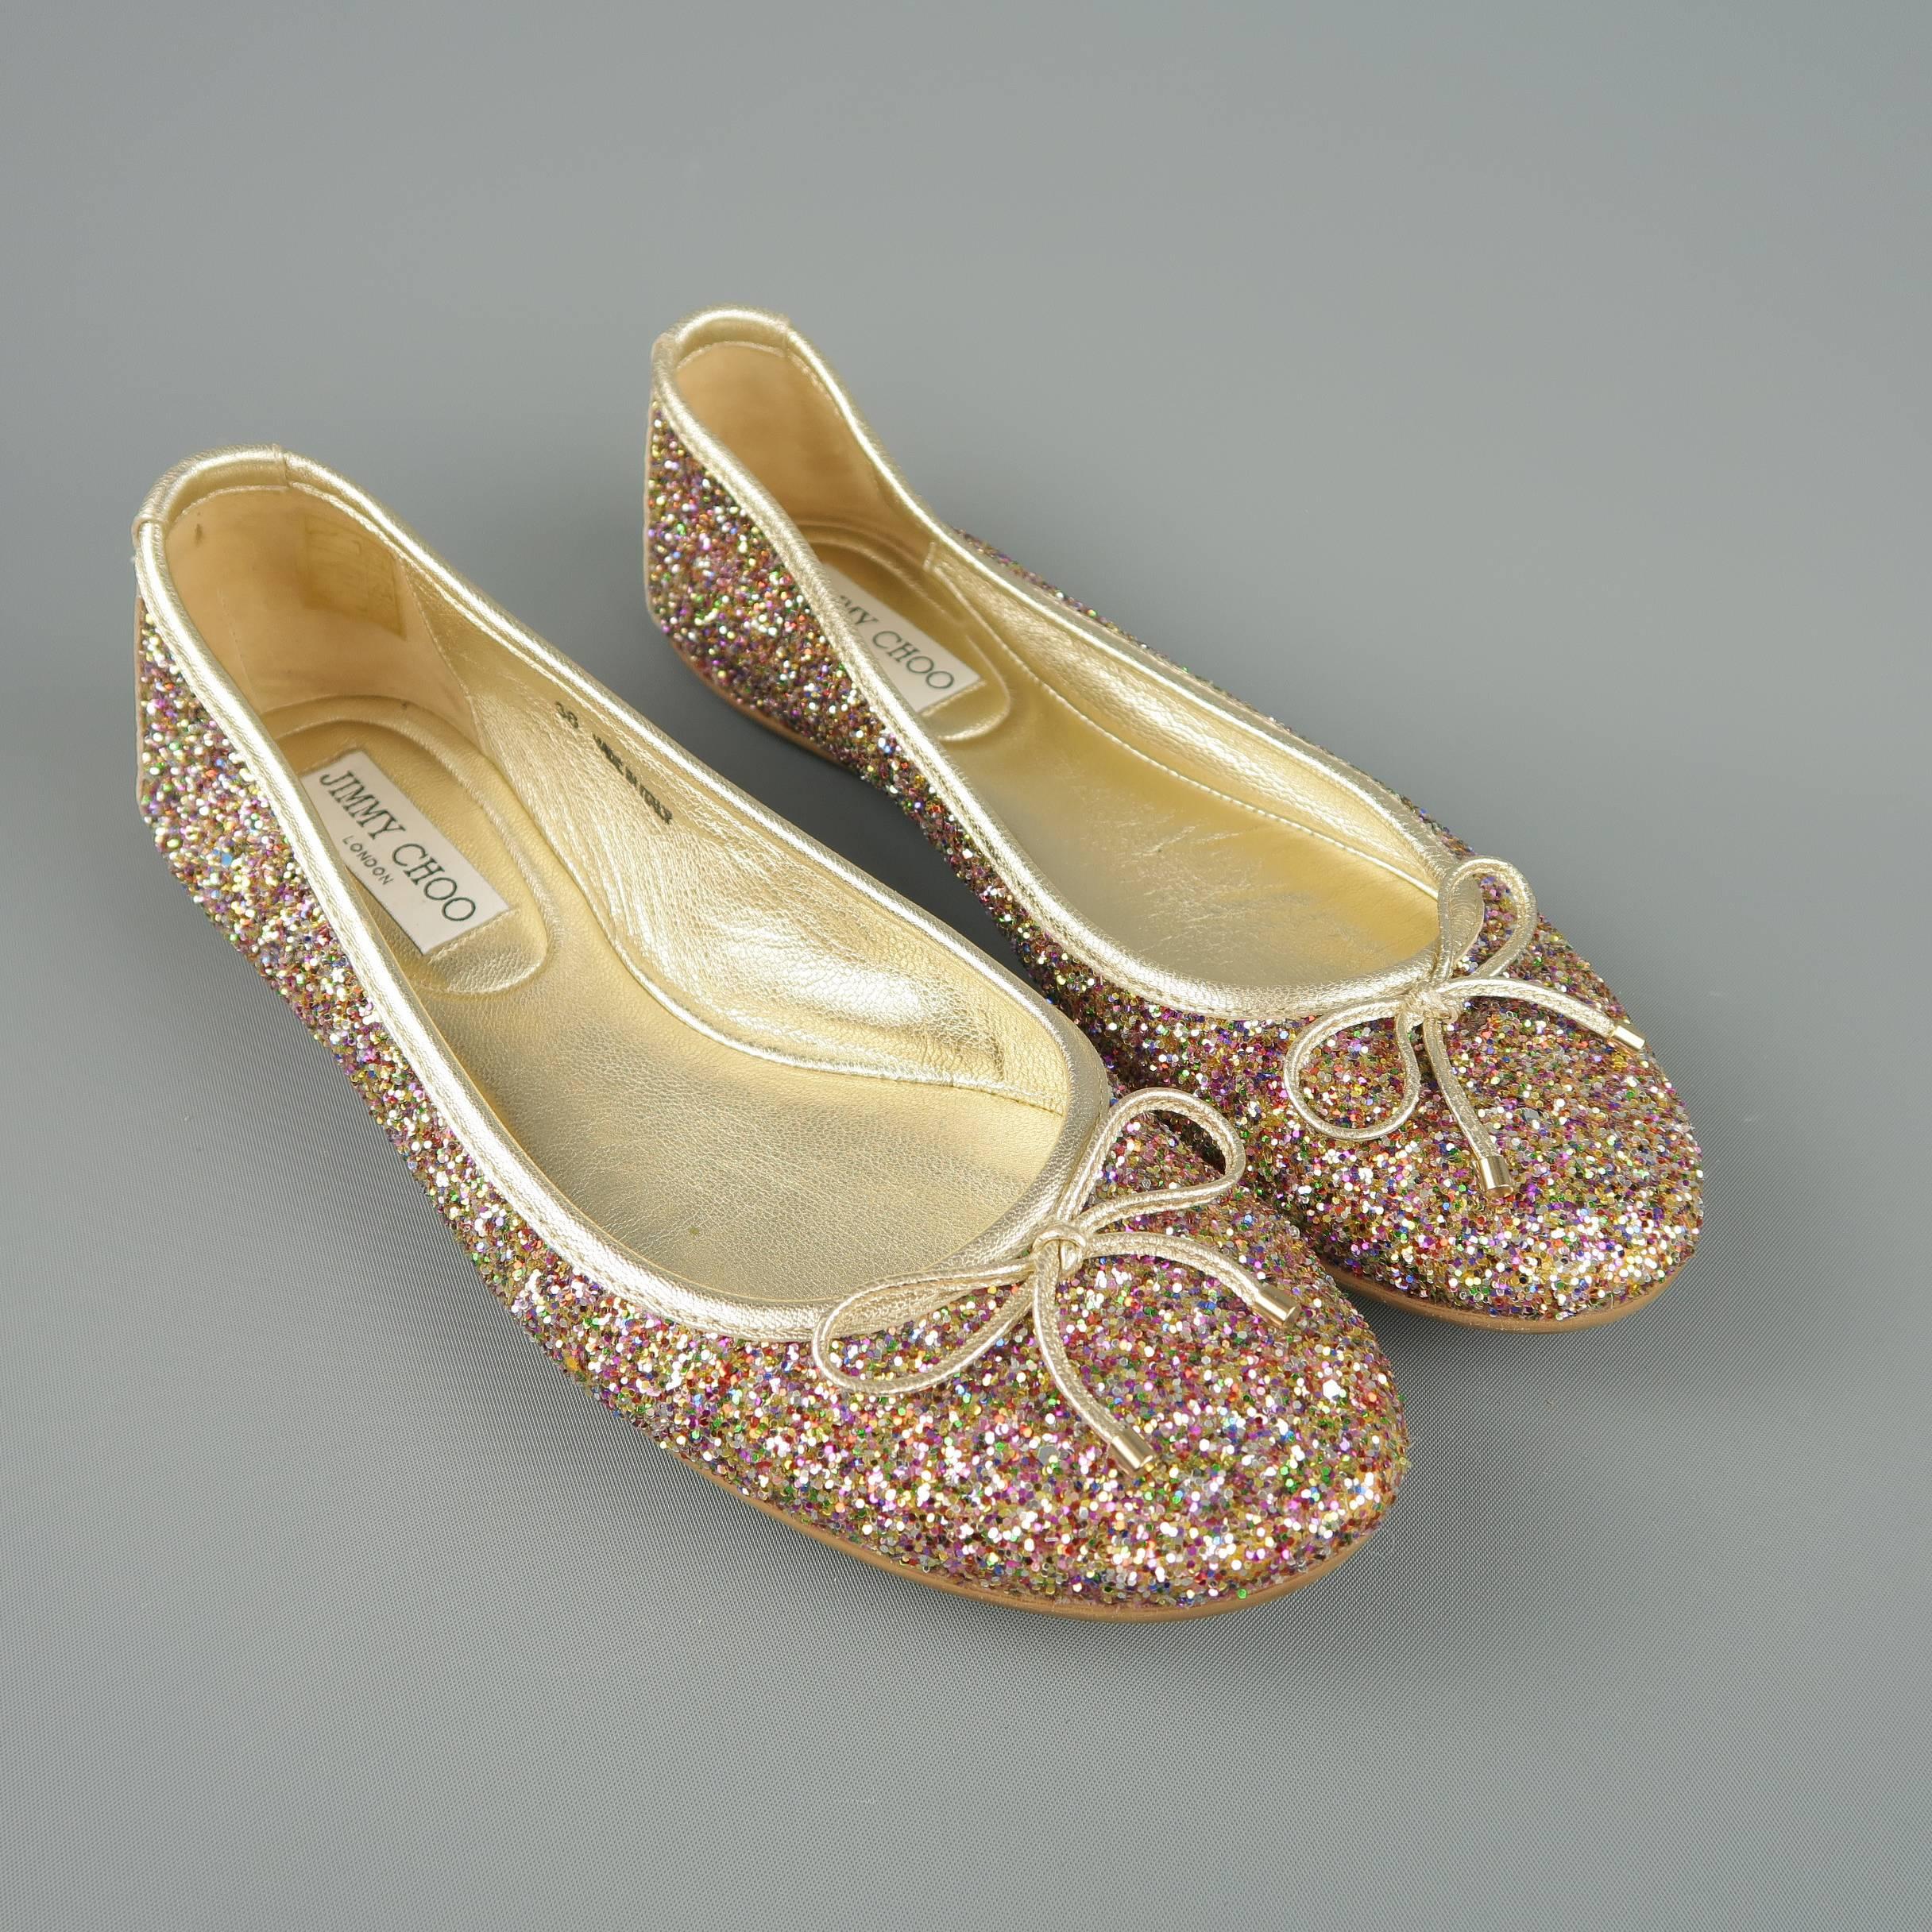 JIMMY CHOO bal;let flats come in multi colored glitter leather with metallic gold piping and bow front.Made in Italy.
 
Excellent Pre-Owned Condition.
Marked:IT 38
 
Outsole: 10 x 3 in.
